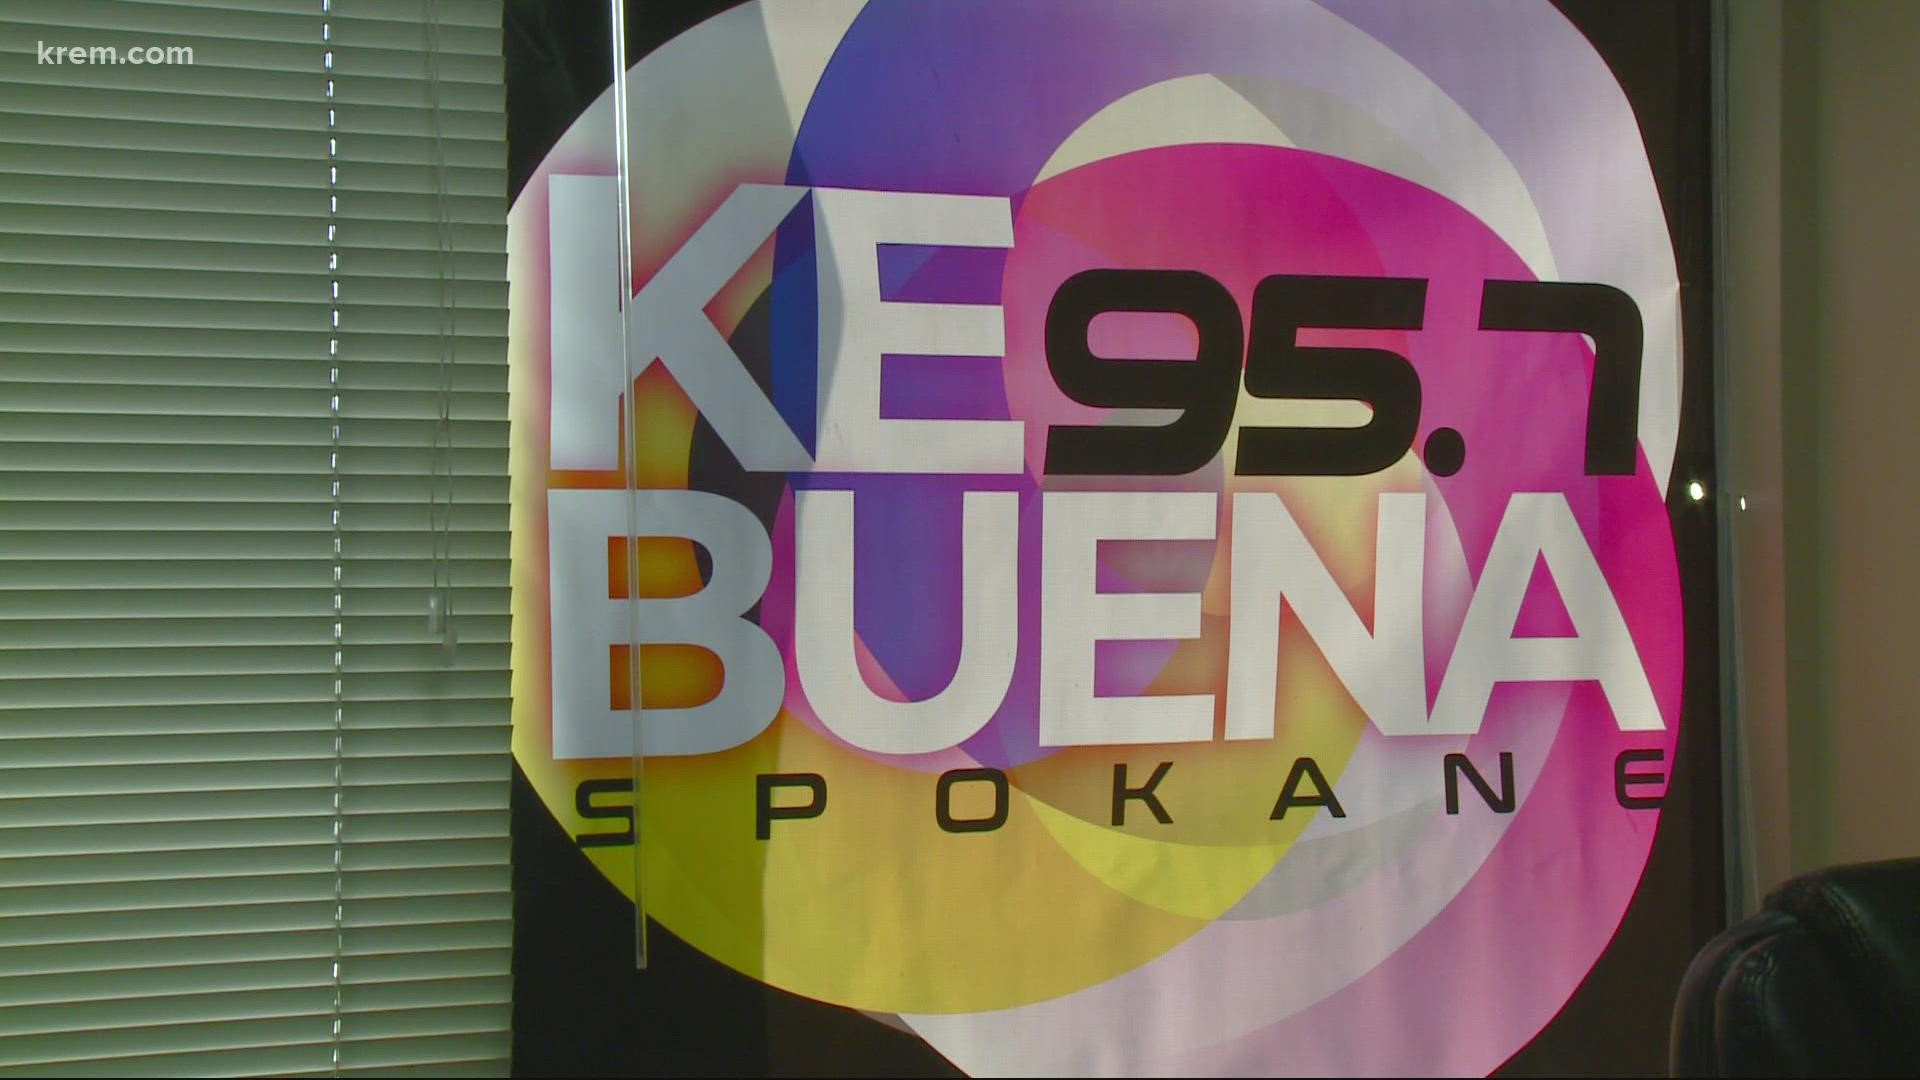 The radio station broadcast the best of regional Mexican music such as rancheras, mariachi, cumbia and more .